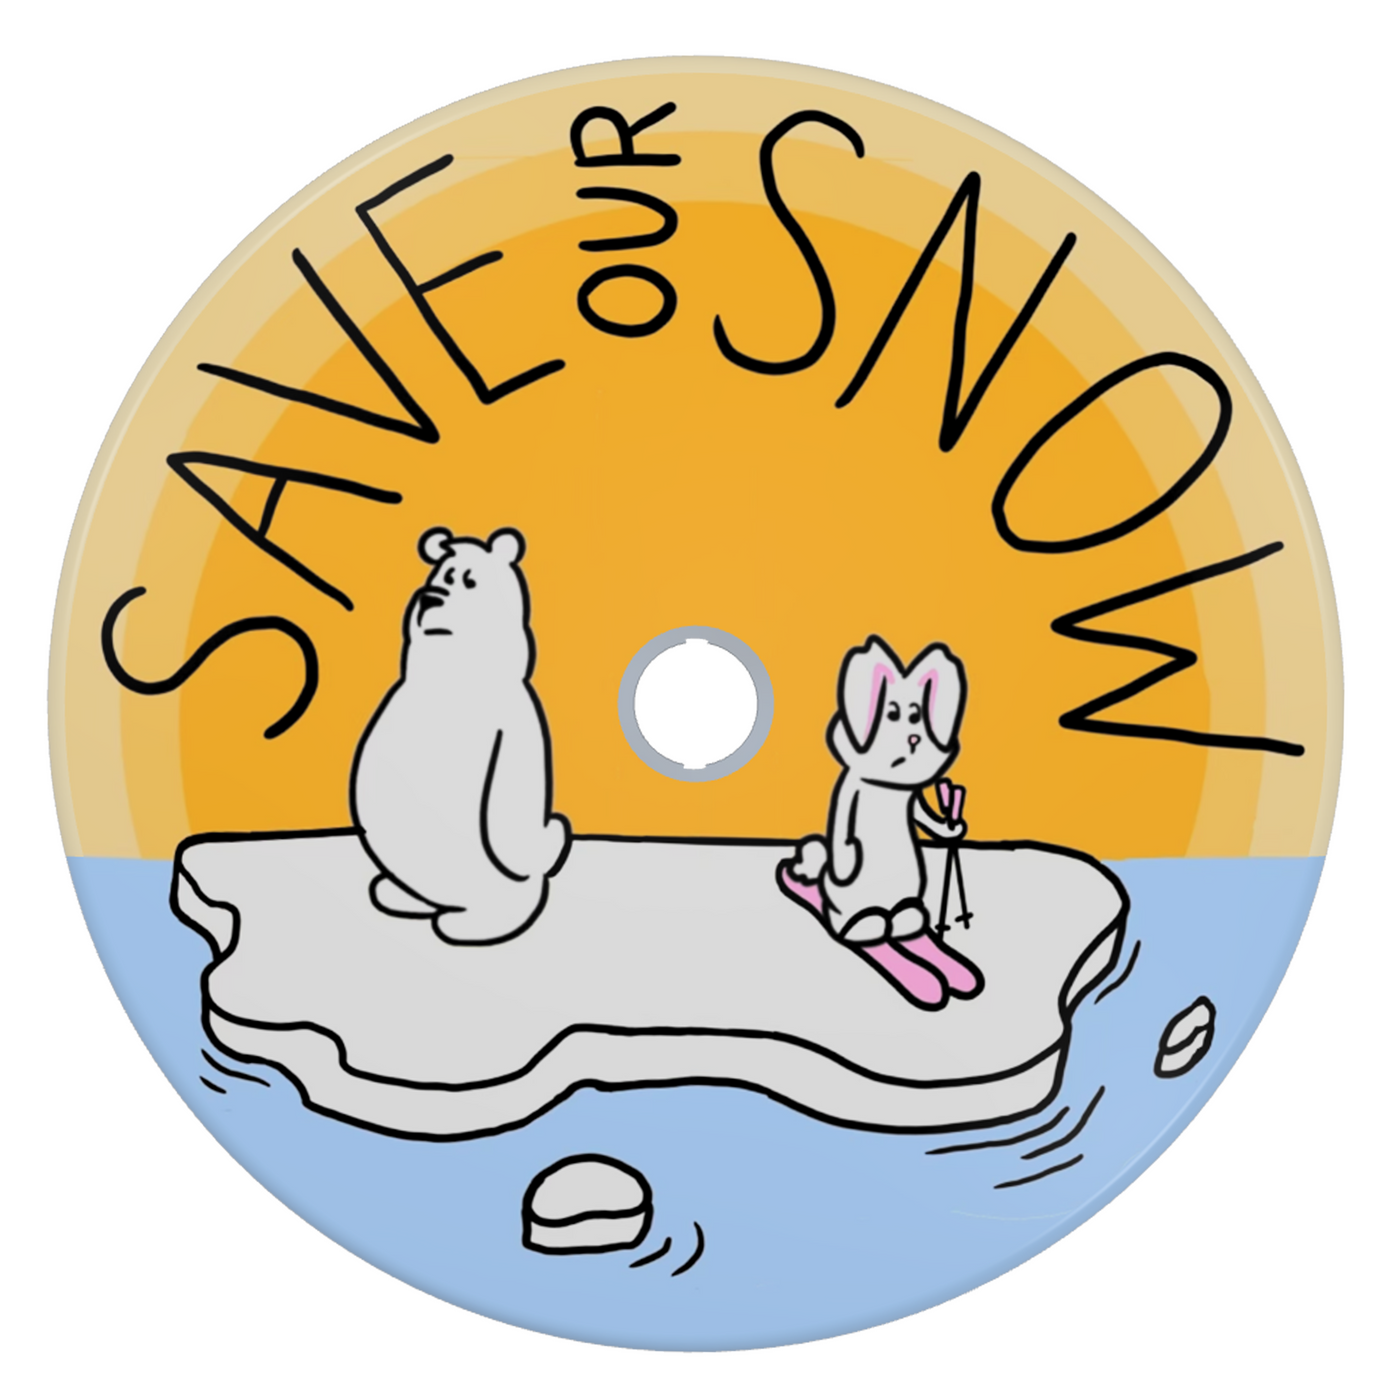 Save Our Snow